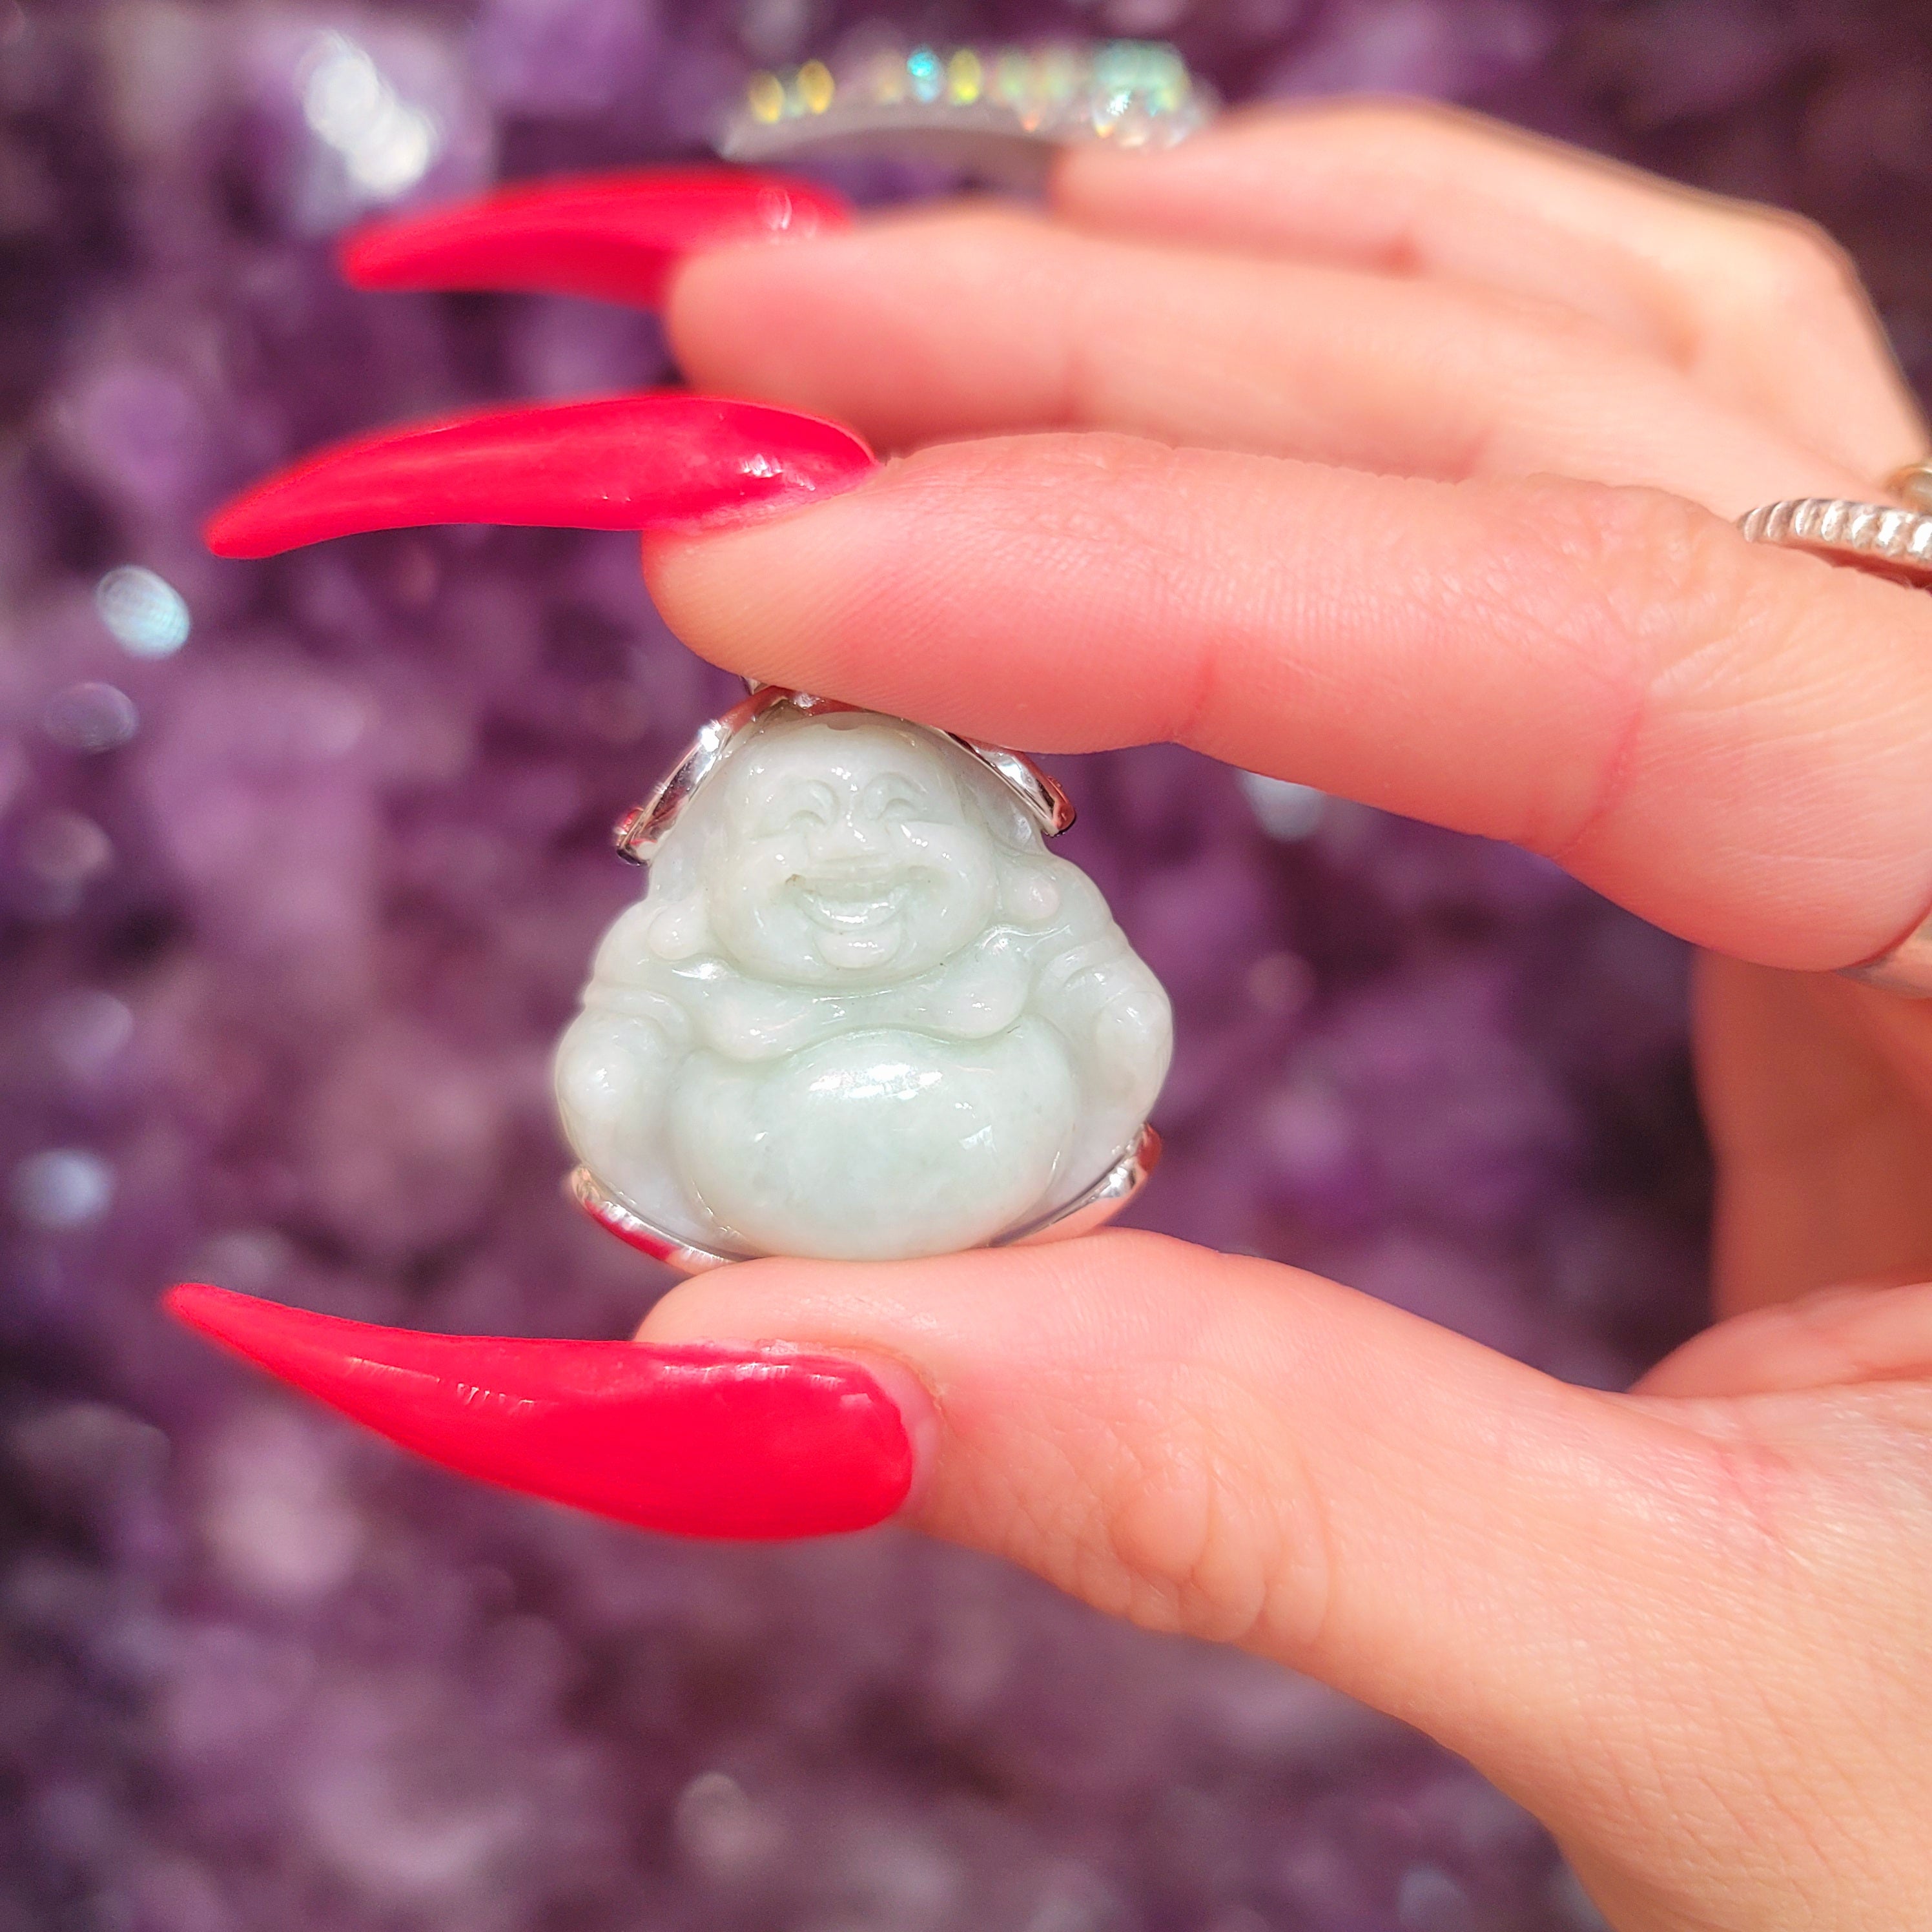 Jade Laughing Buddha Pendant for Good Luck, Prosperity and Serenity